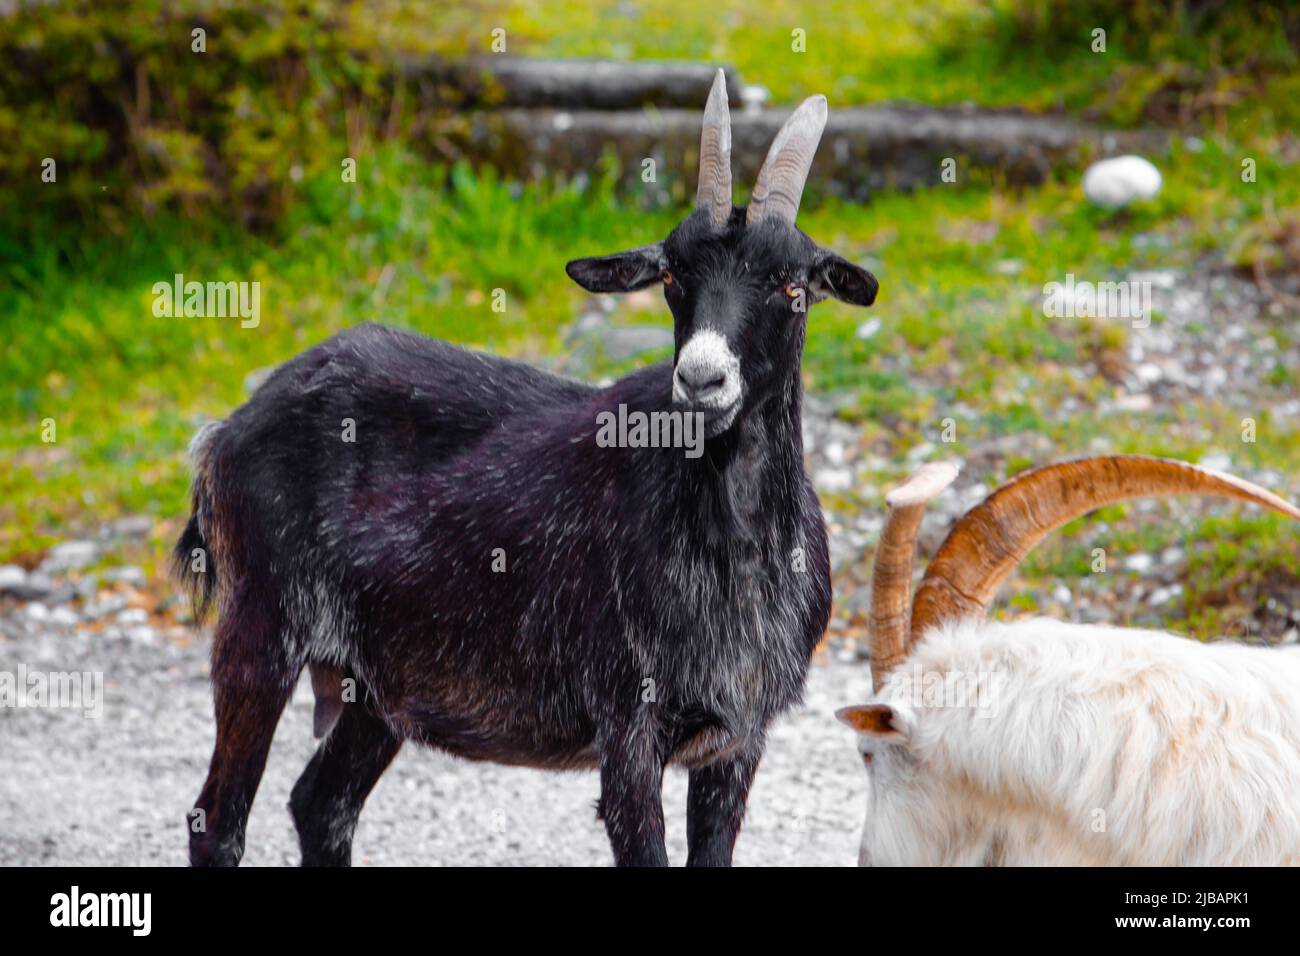 Black goat with horns on the road Stock Photo